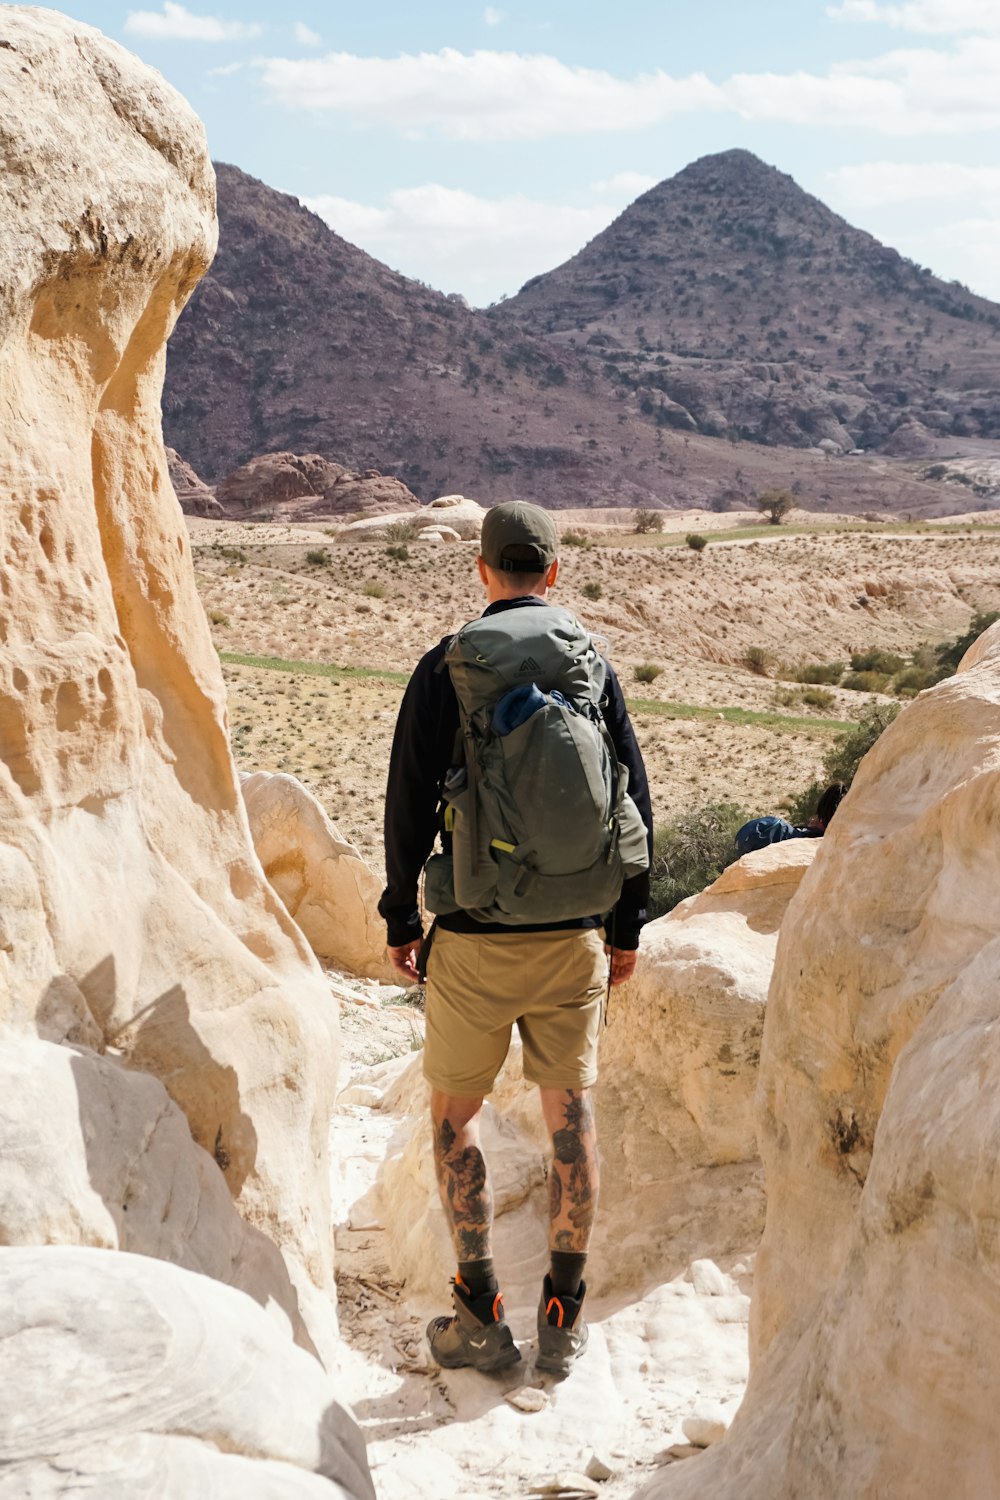 a man with a backpack is walking through some rocks